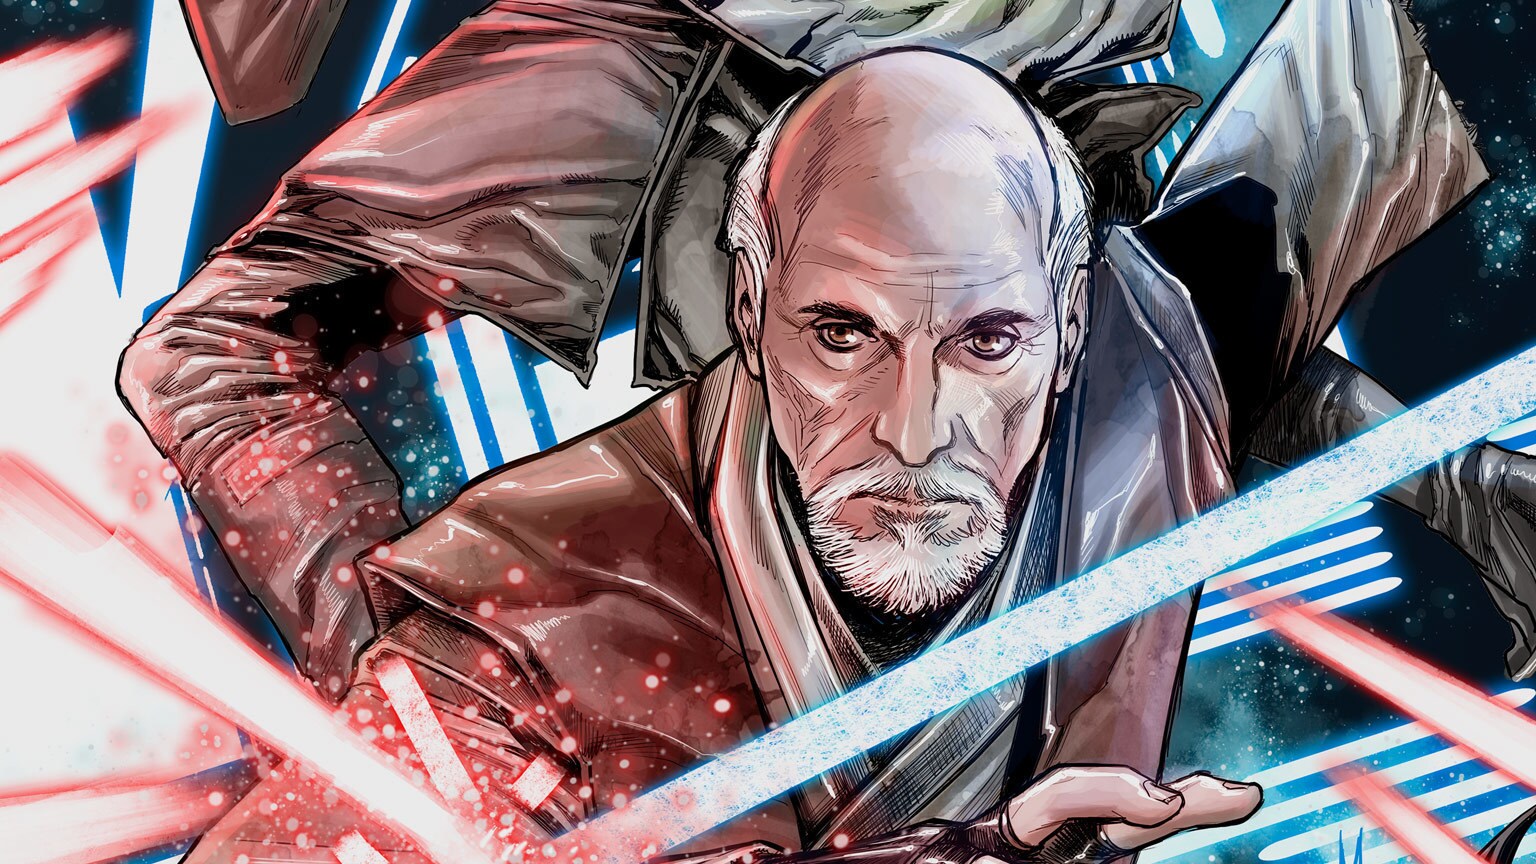 Star Wars Jedi: Fallen Order - Dark Temple, a Prequel Comic to the Game, Is Coming This September